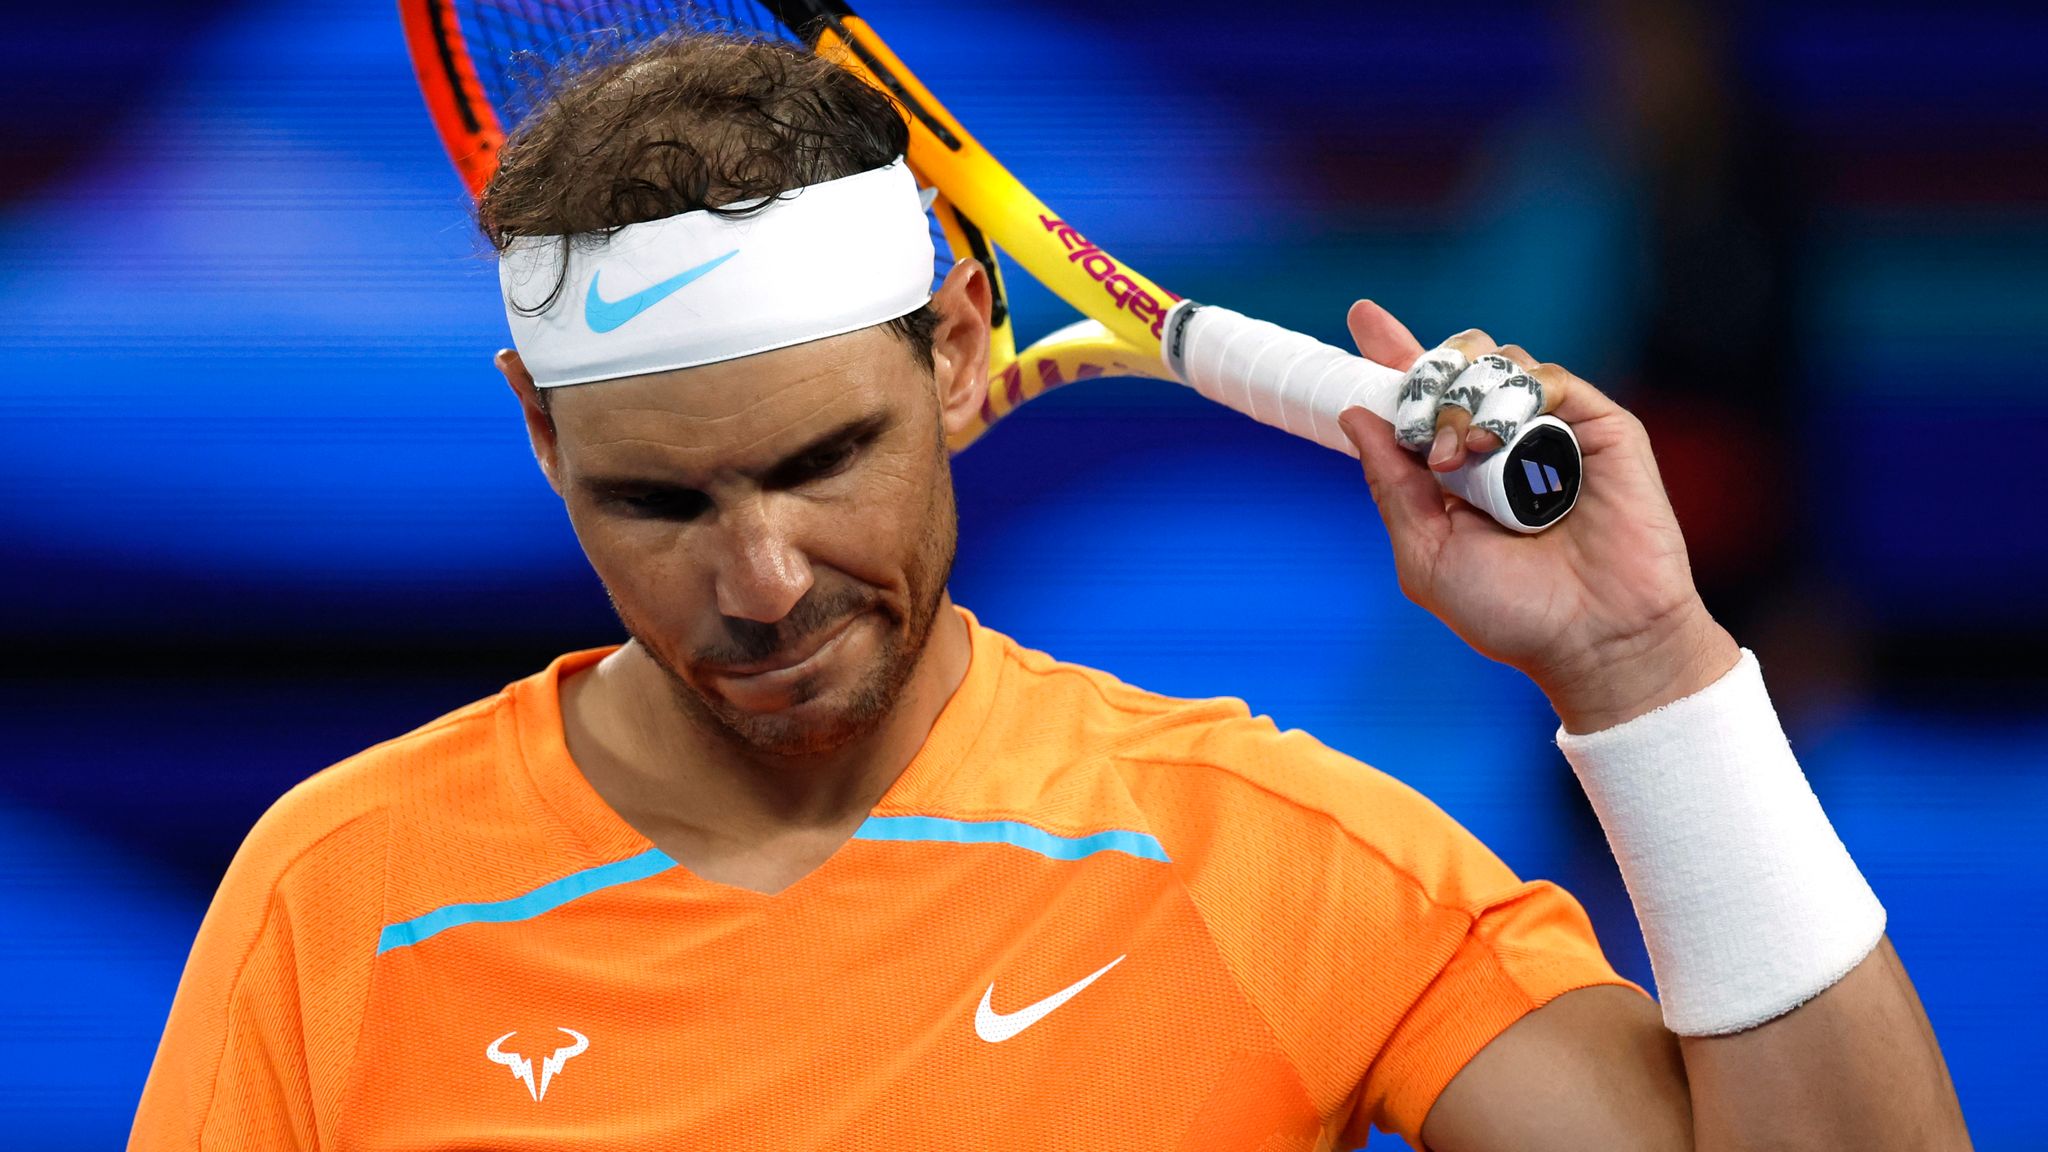 Australian Open Top seed and defending champion Rafael Nadal knocked out by Mackenzie McDonald Tennis News Sky Sports